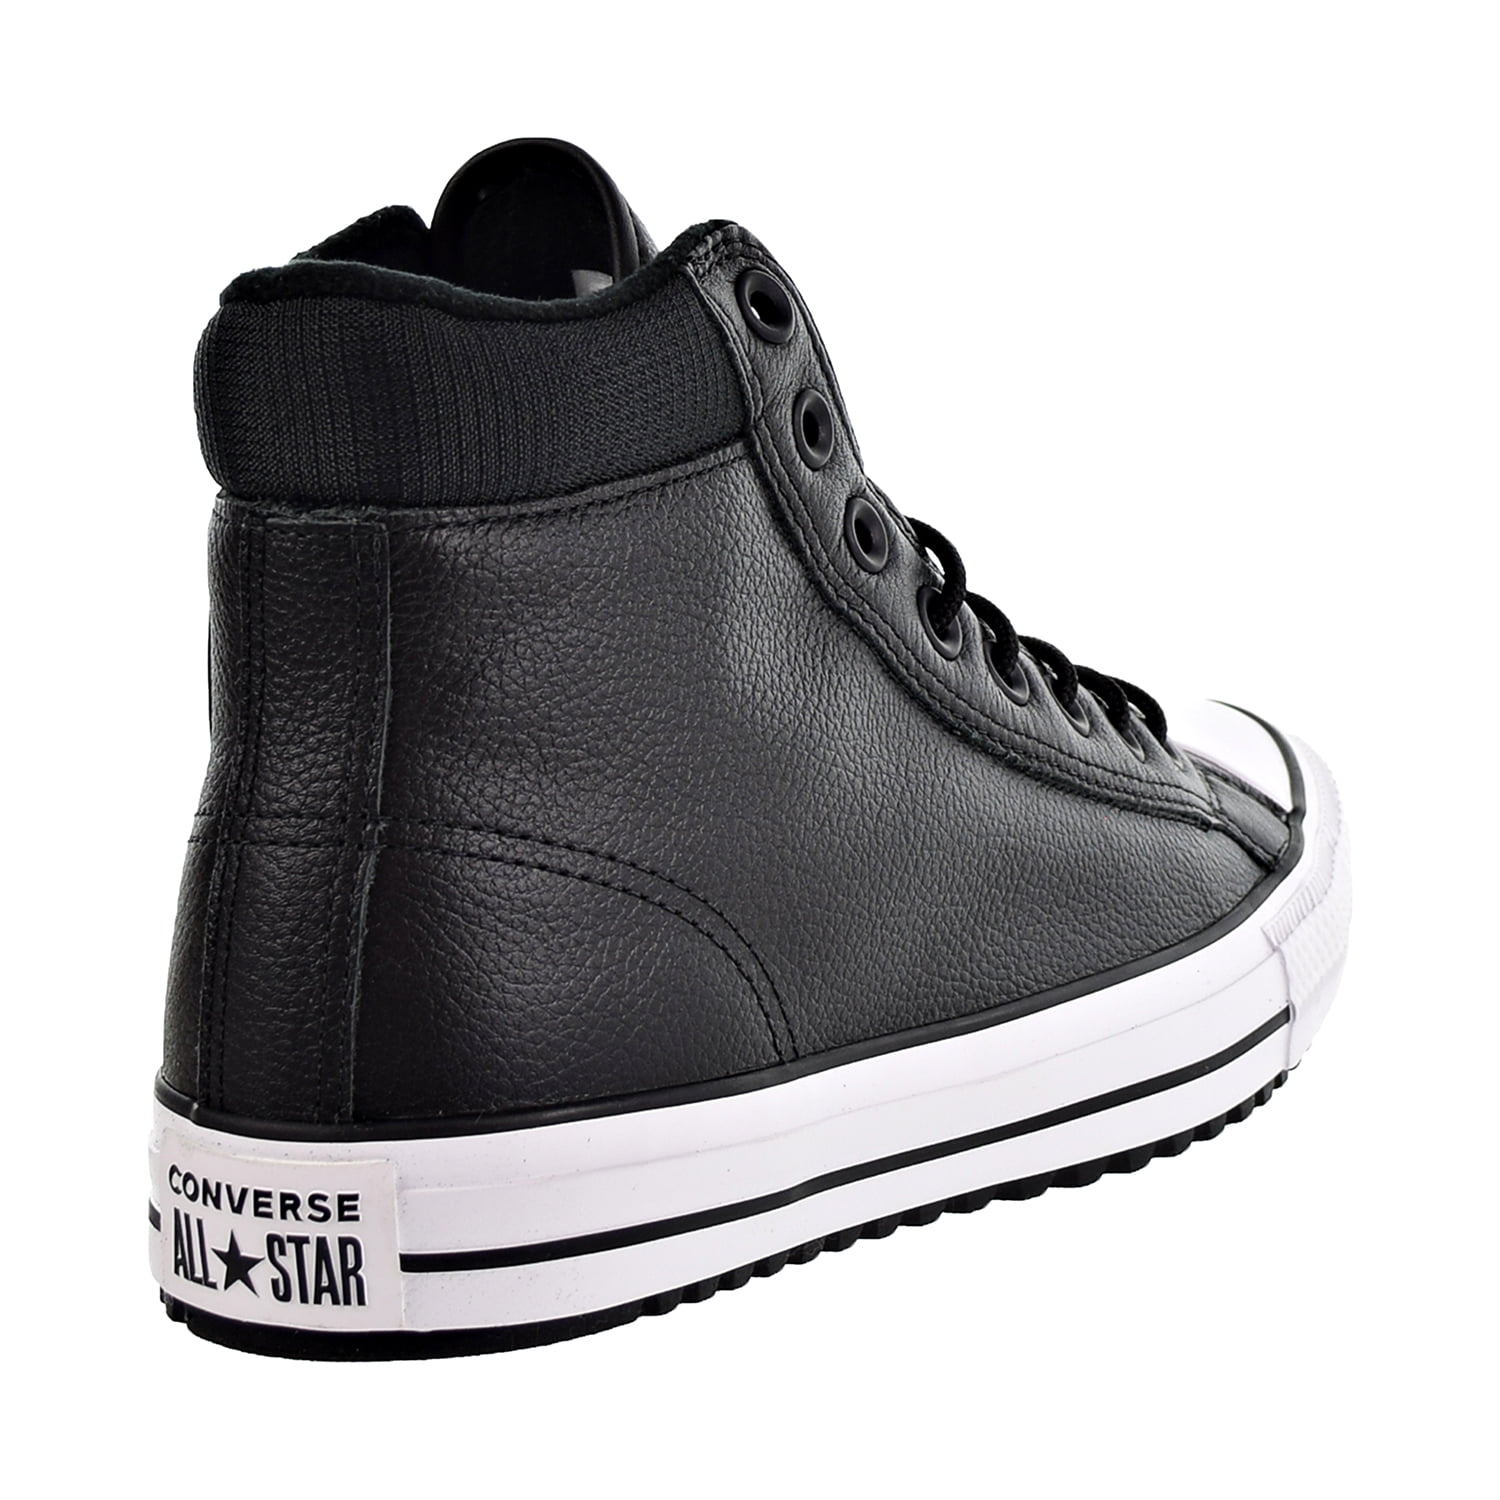 converse black leather boots